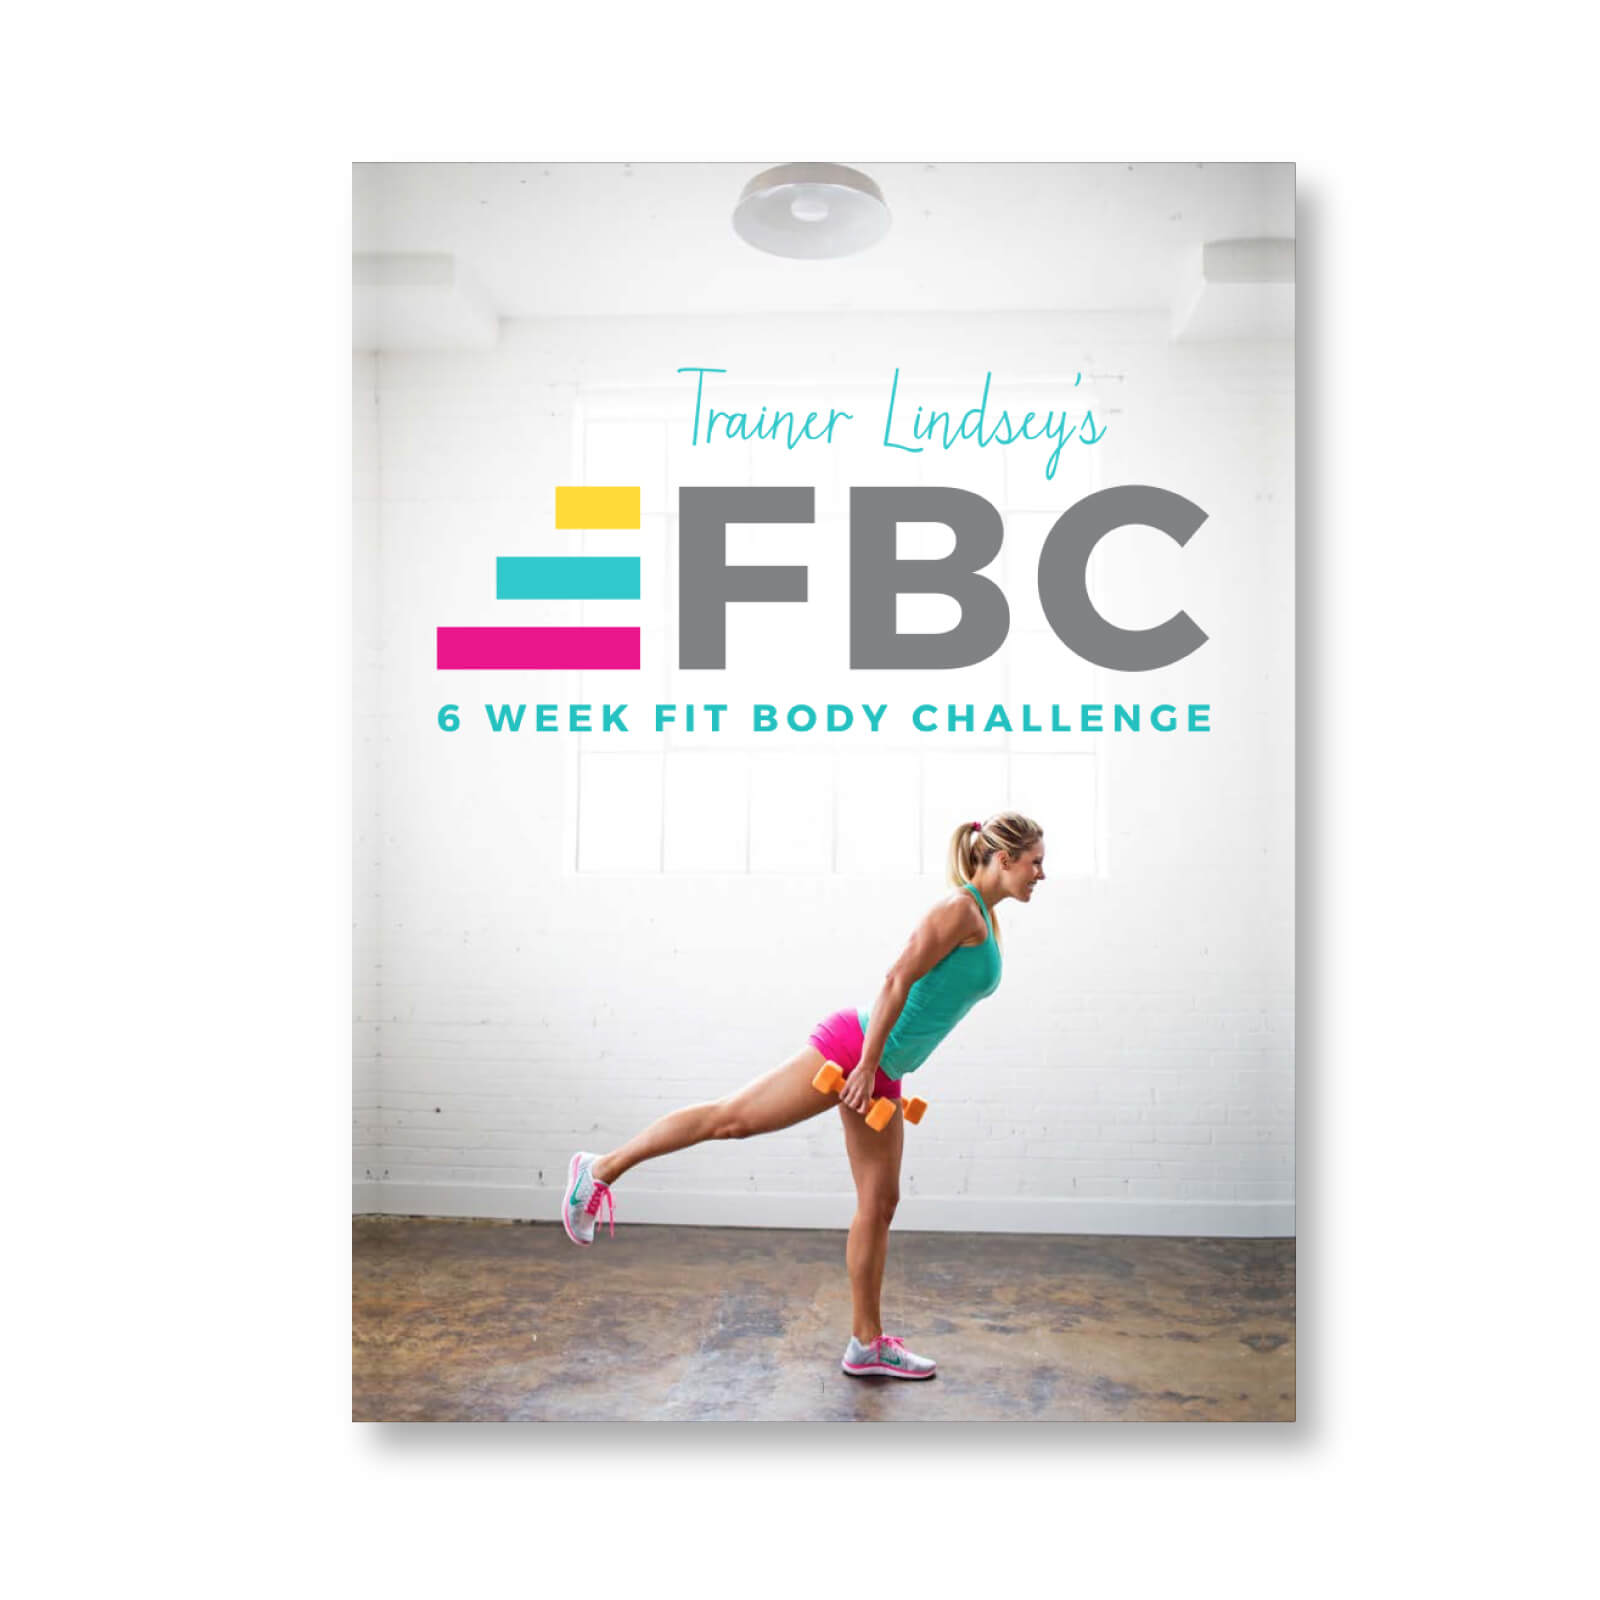 Trainer Lindsey's Fbc Extension - Summer 2018